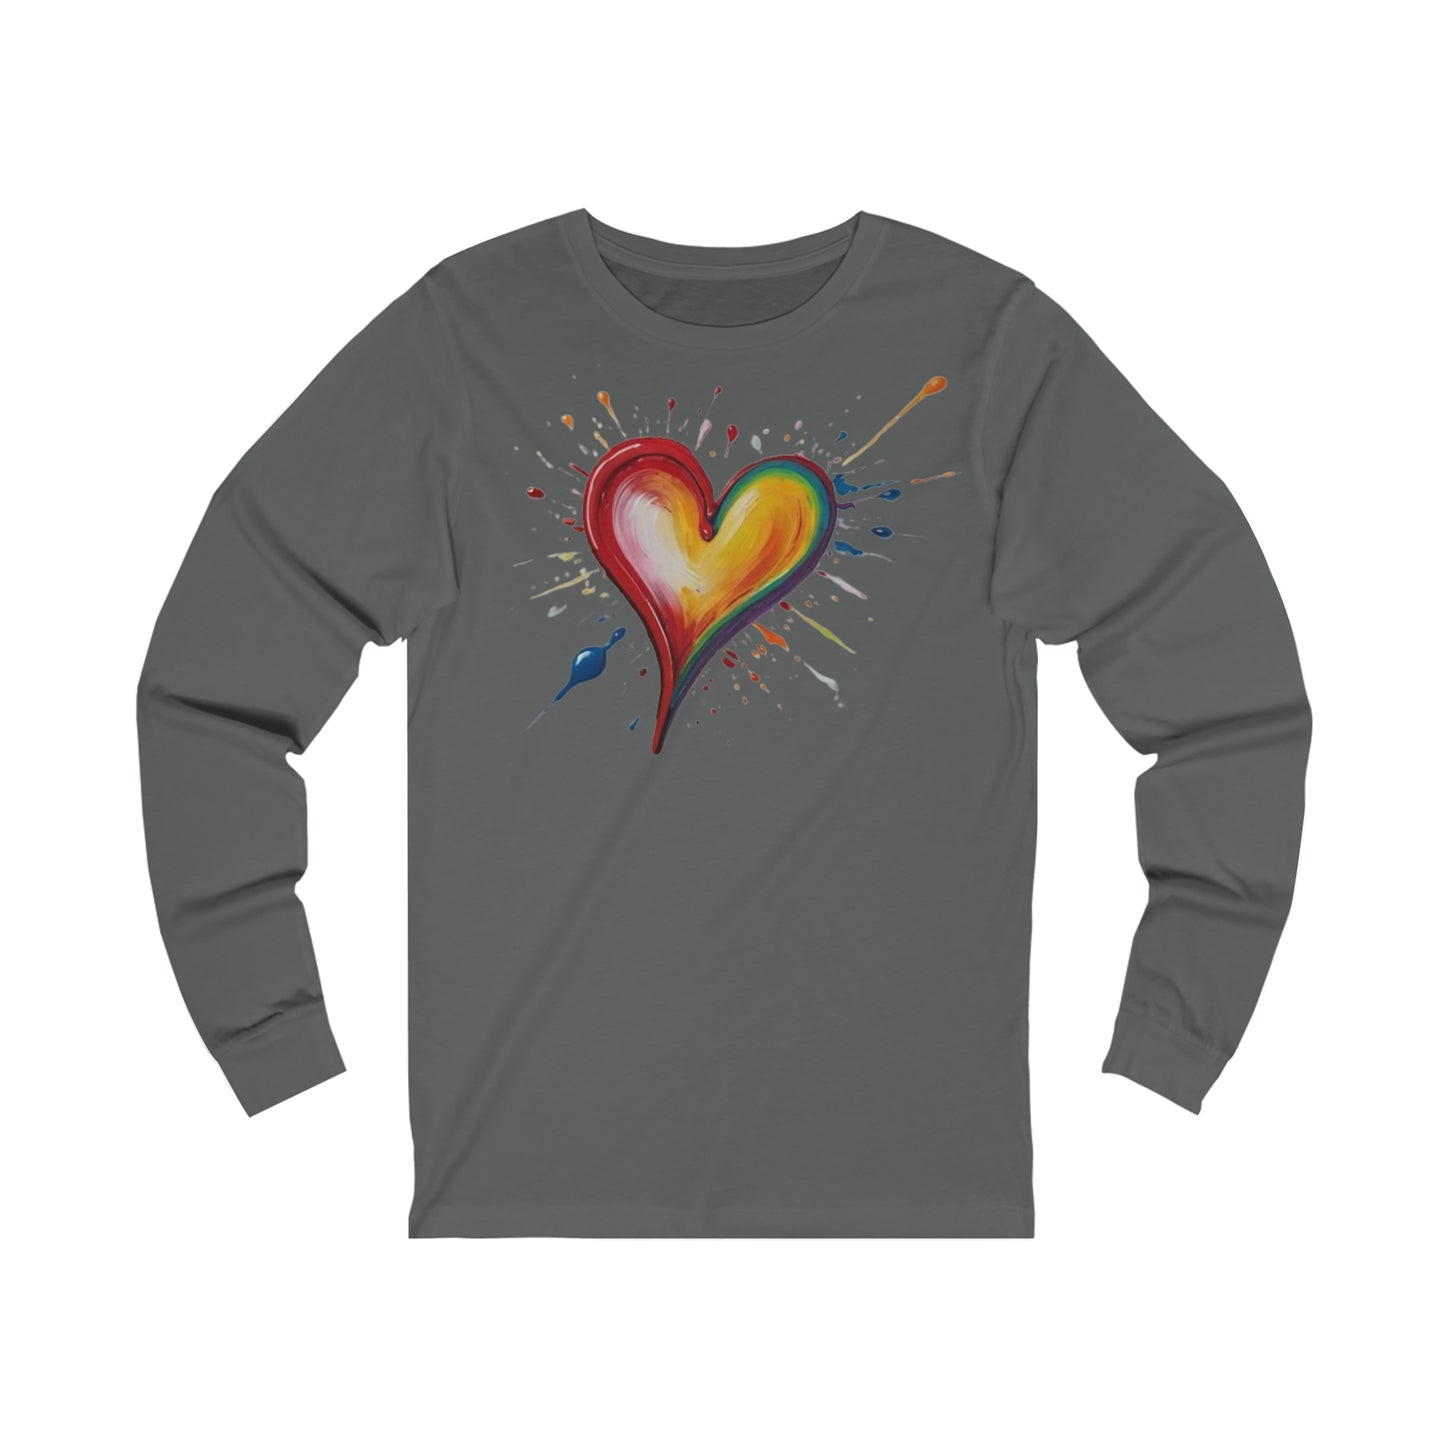 Messy Painted Colourful Slanted Love Heart - Unisex Jersey Long Sleeve Tee